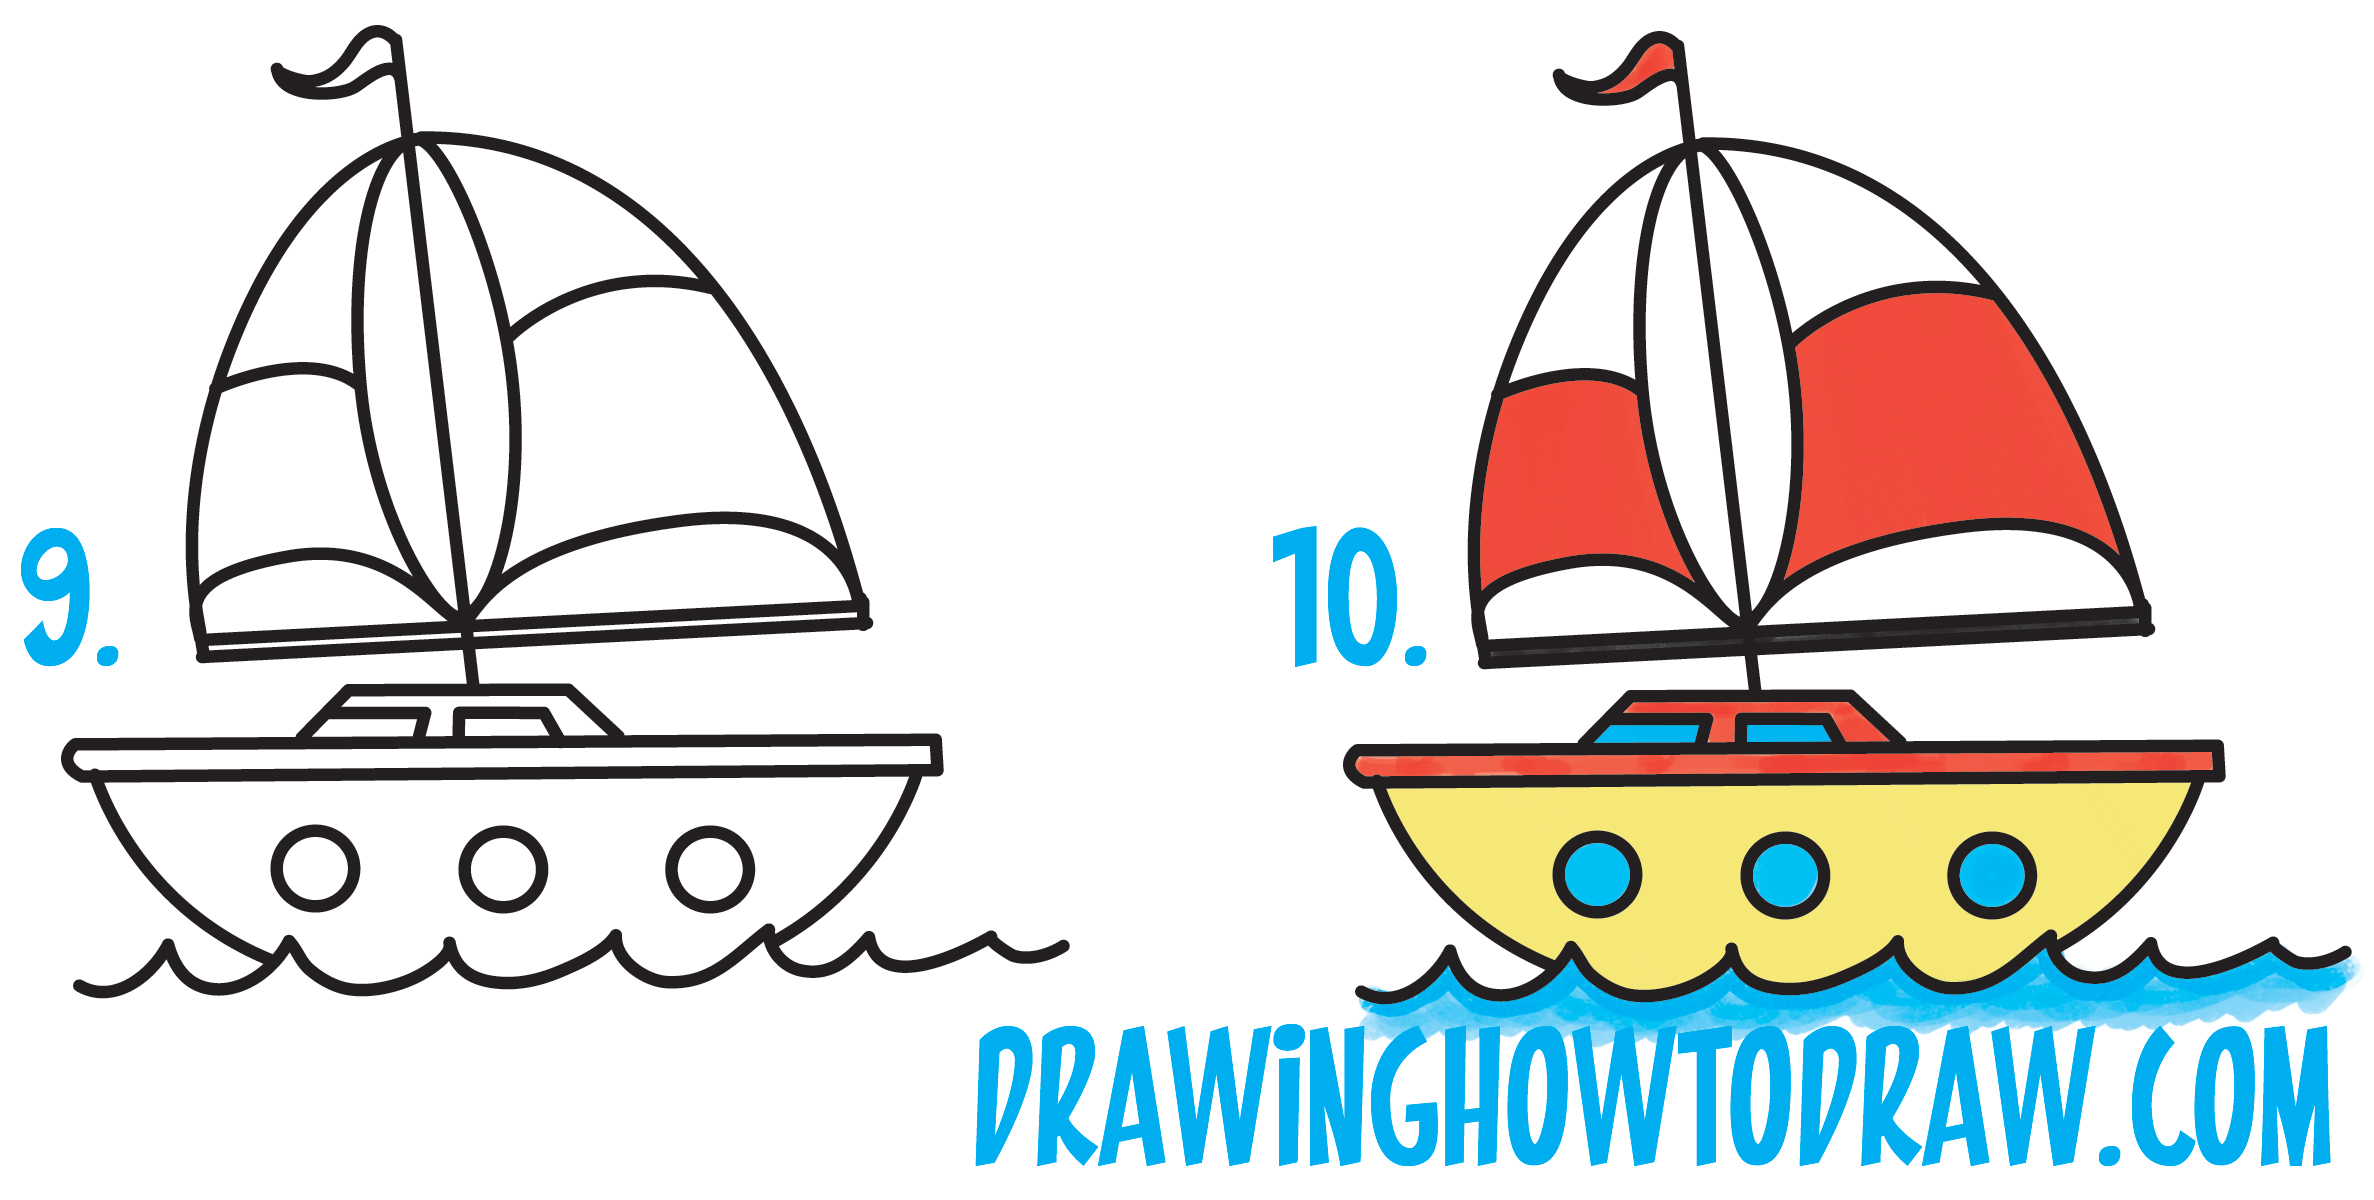 How to Draw A Boat - Easy Drawing for Kids - PRB ARTS-saigonsouth.com.vn